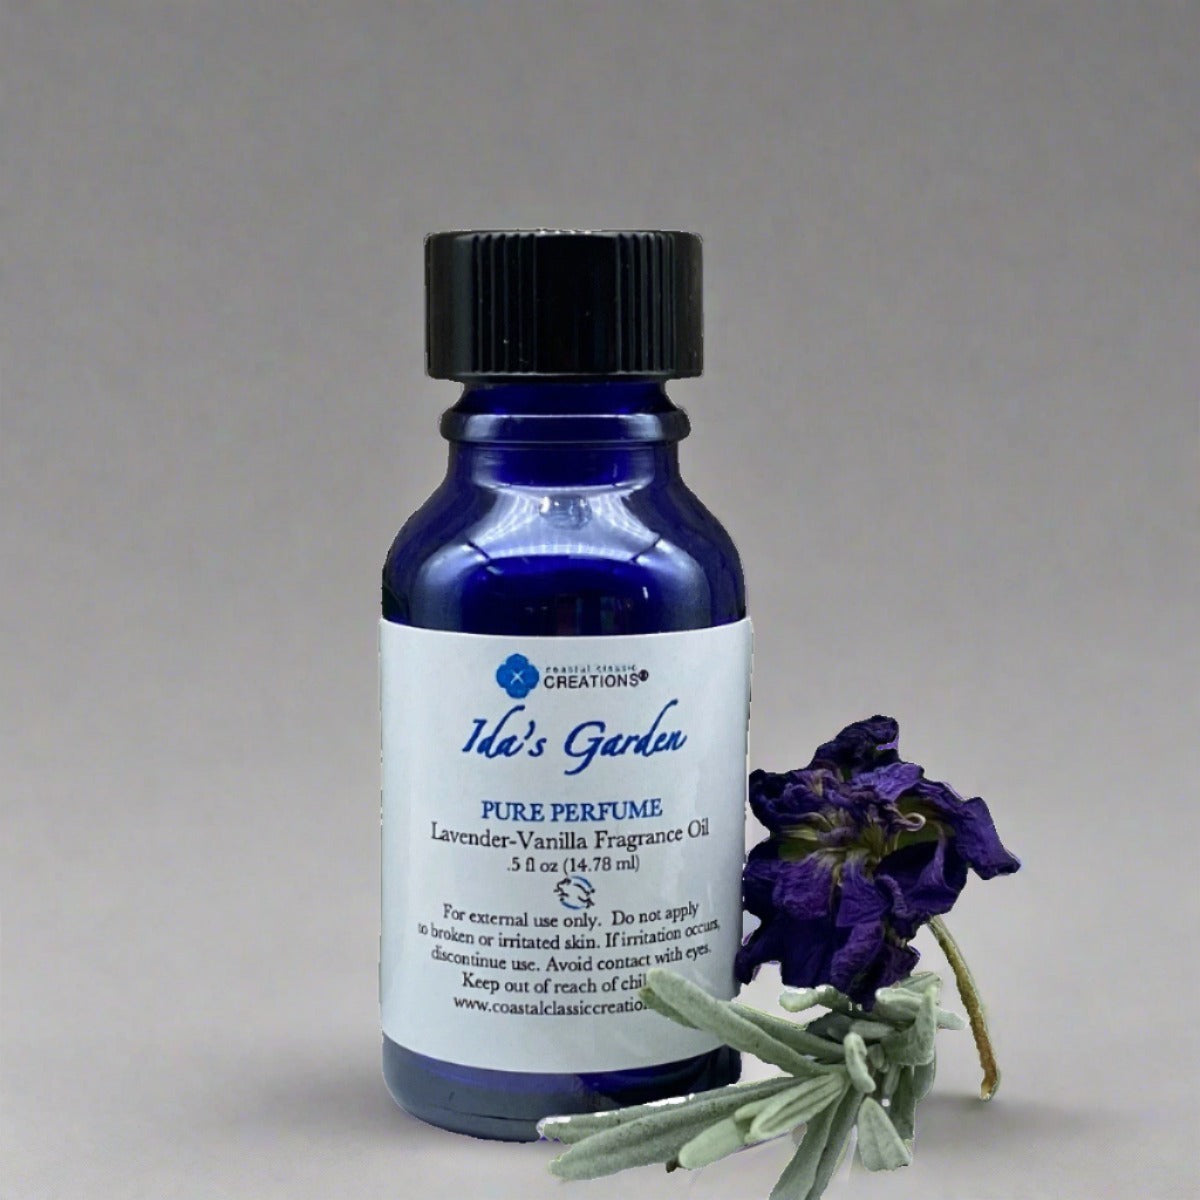 Lavender Vanilla perfume with lavender flowers for an unusual scent